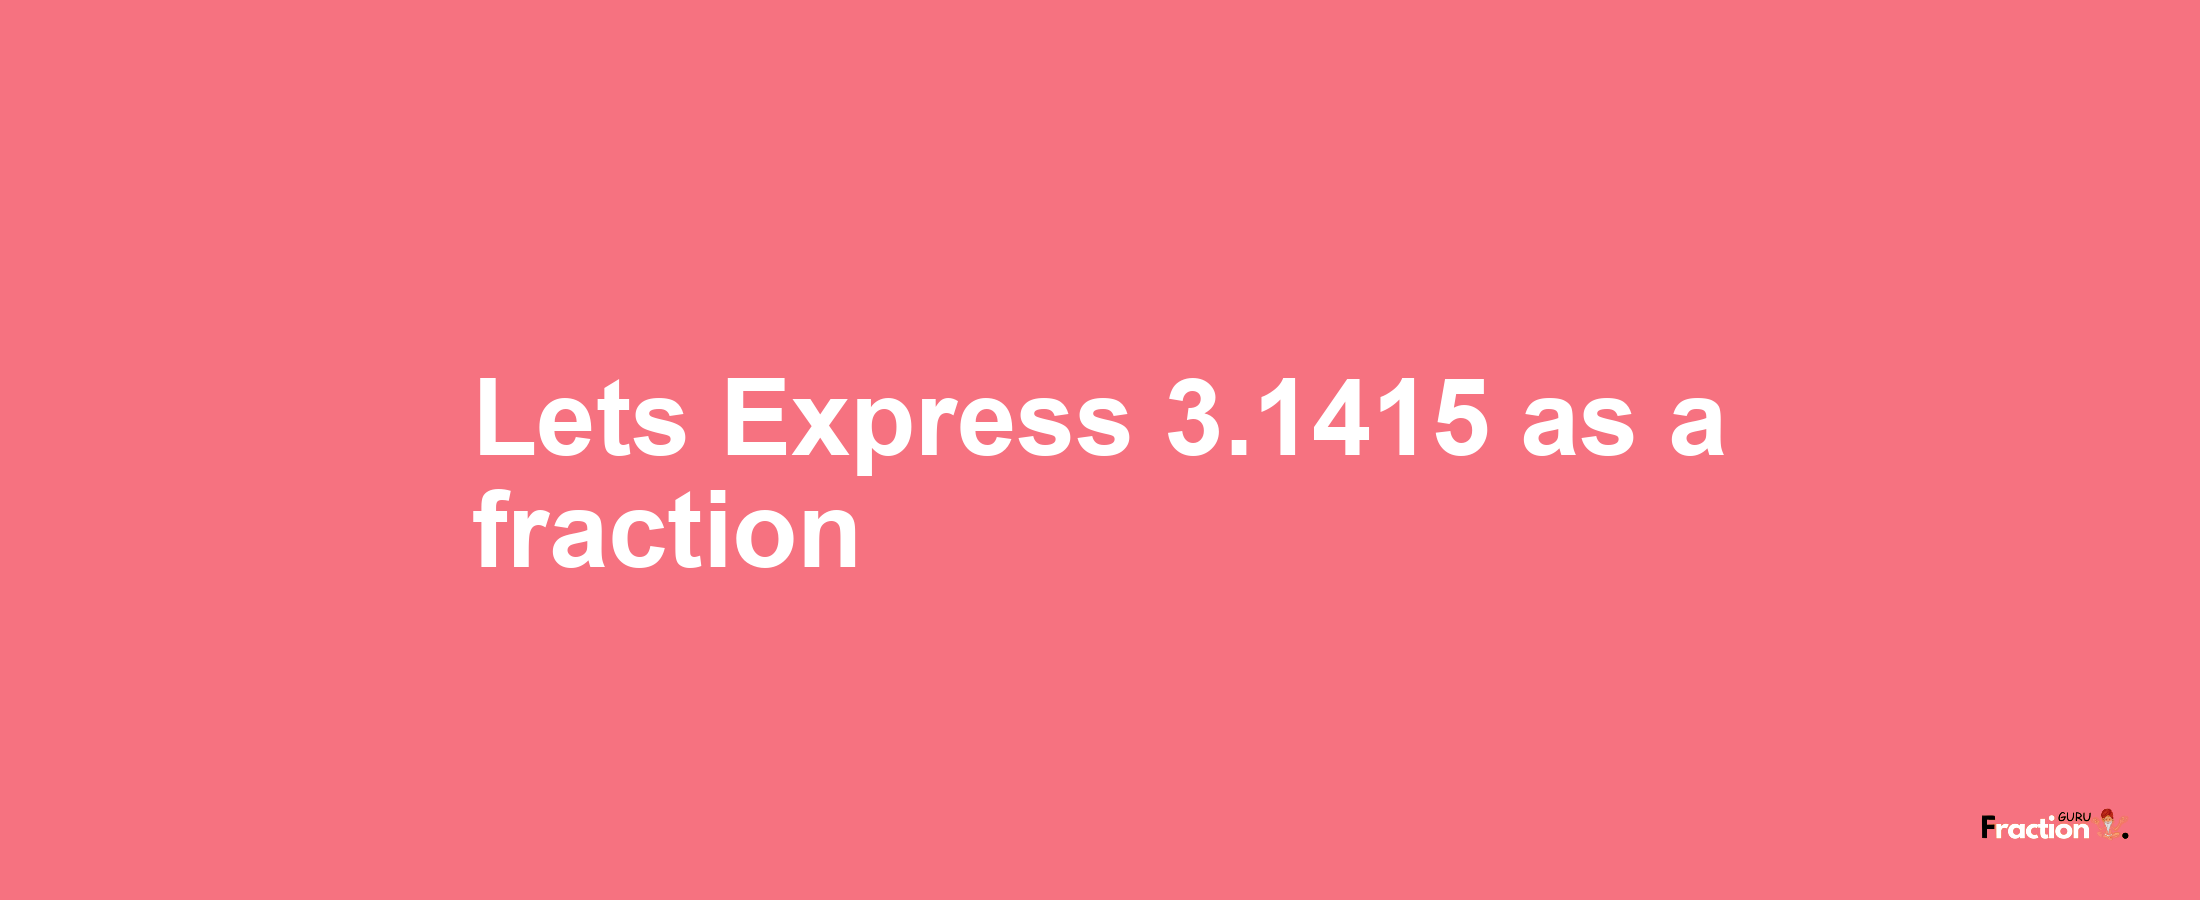 Lets Express 3.1415 as afraction